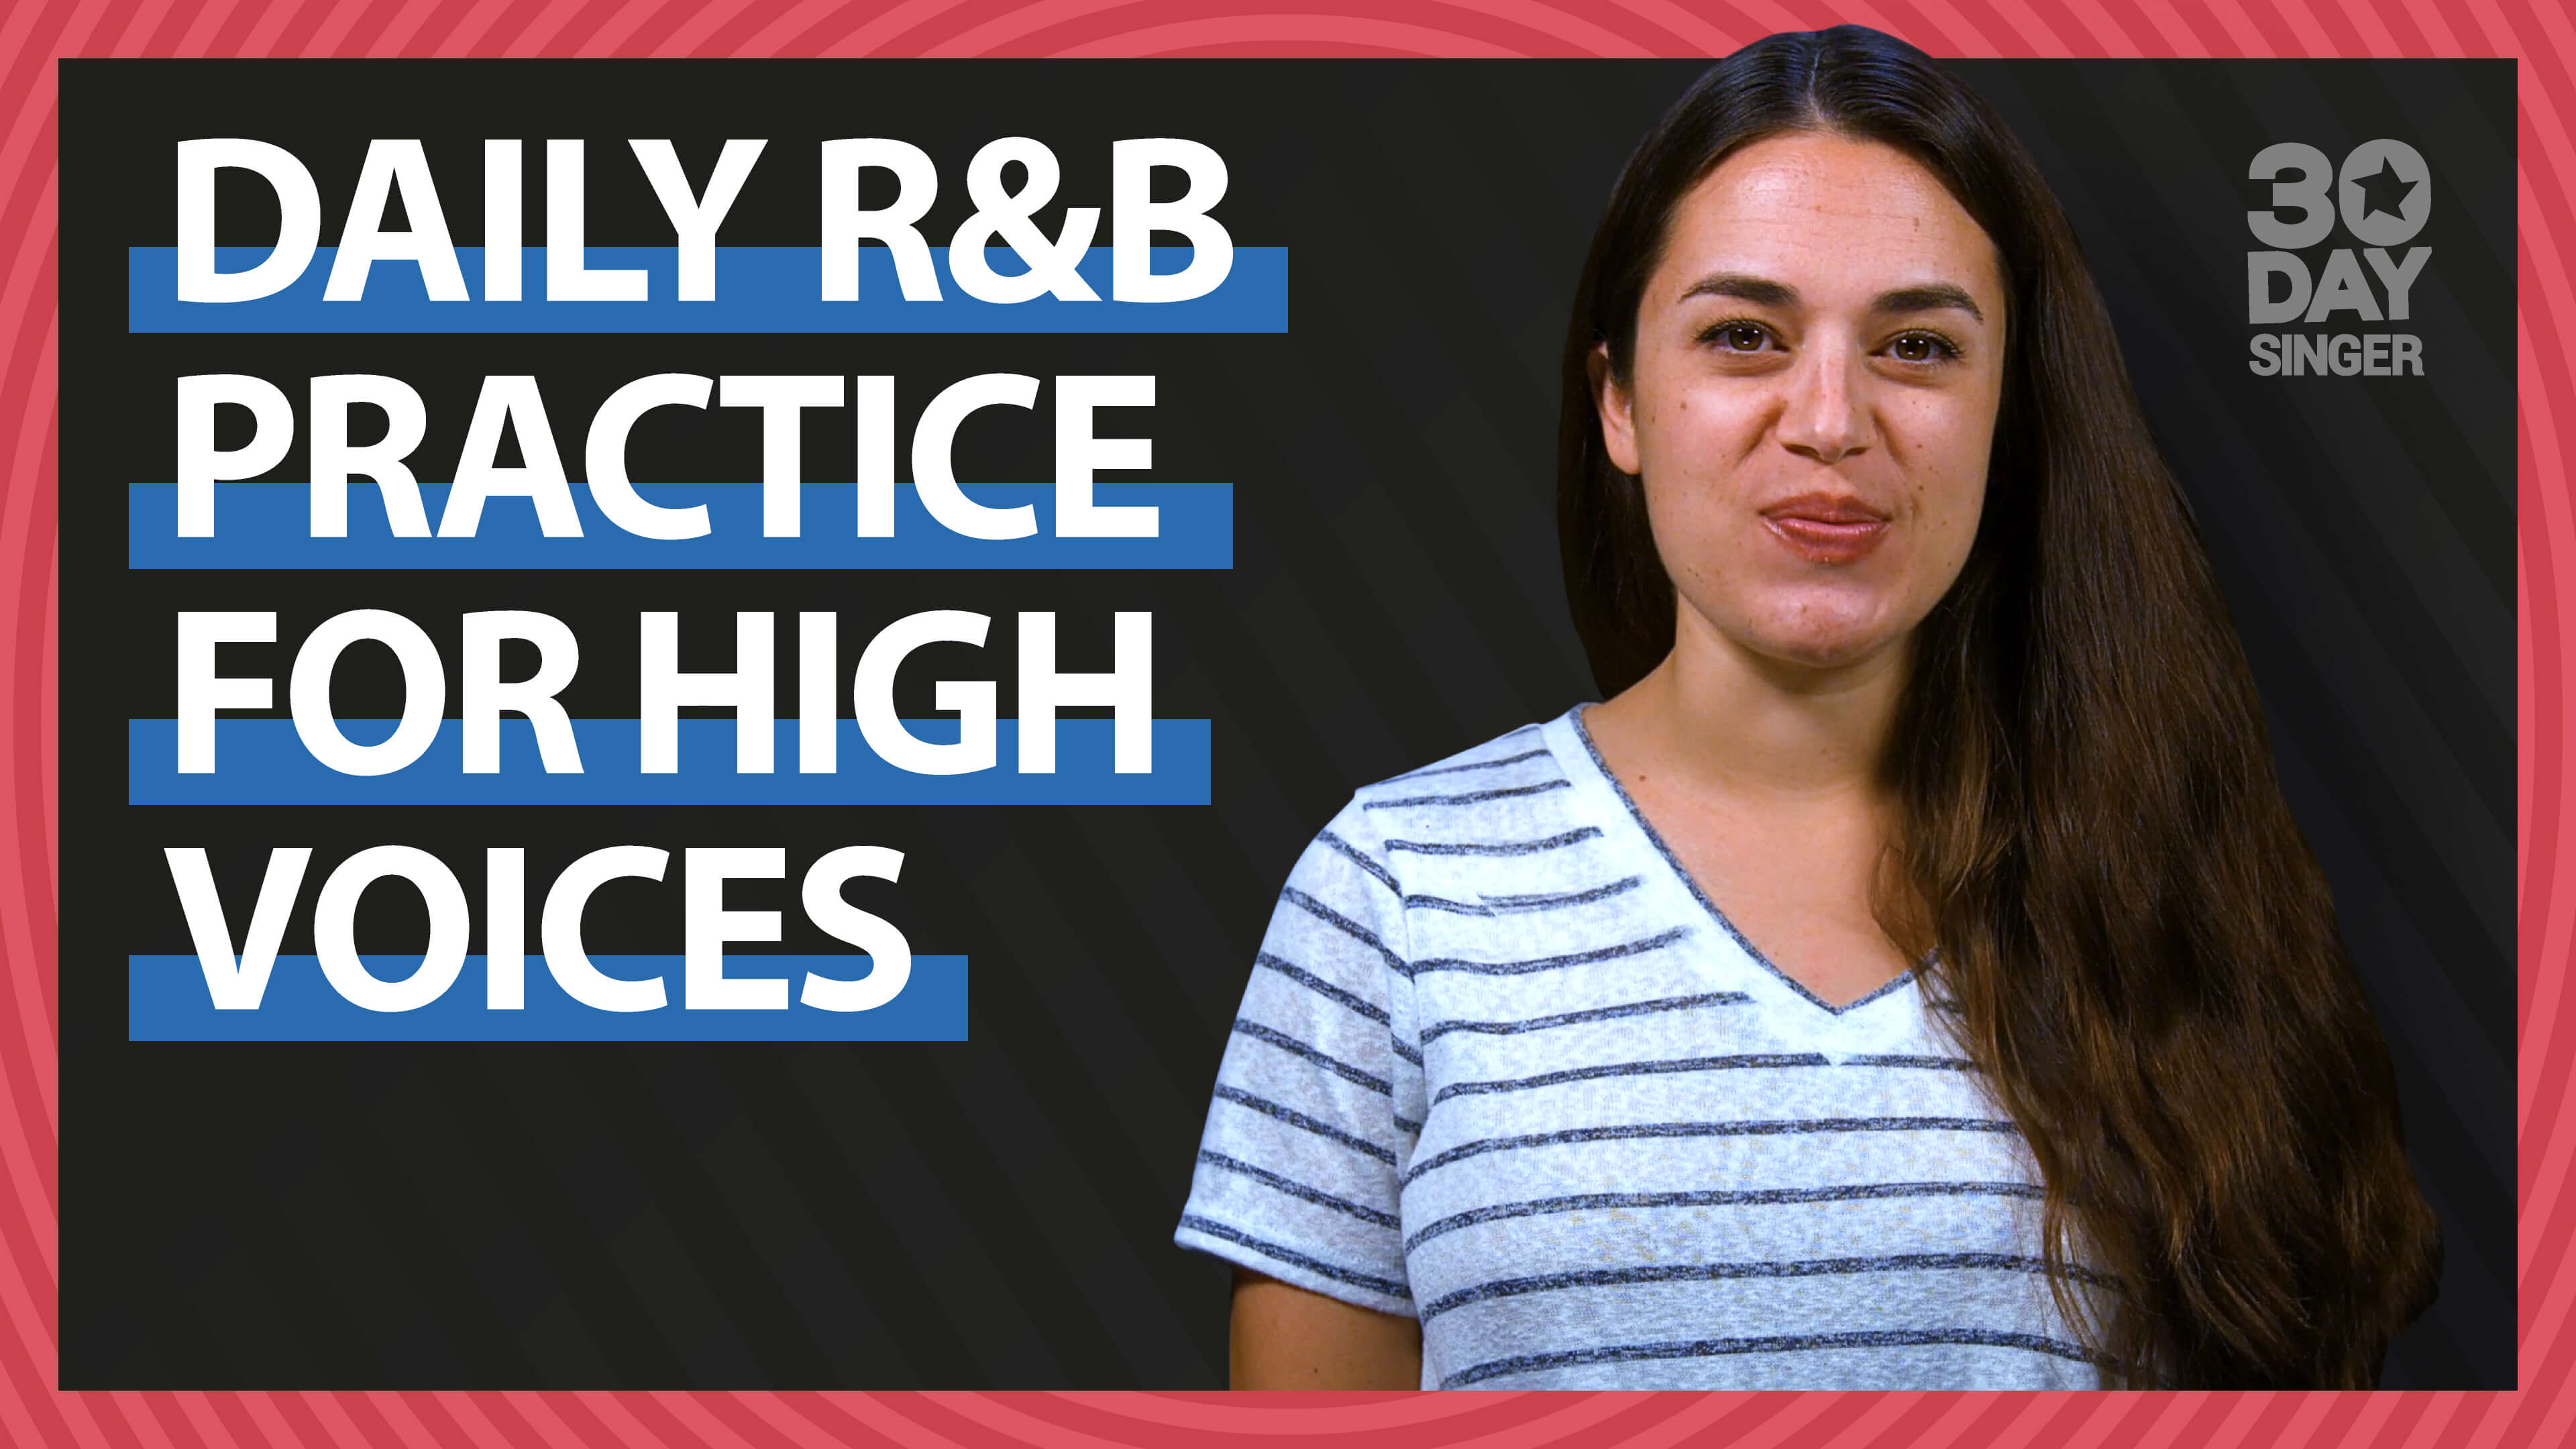 Daily R&B Practice For High Voices